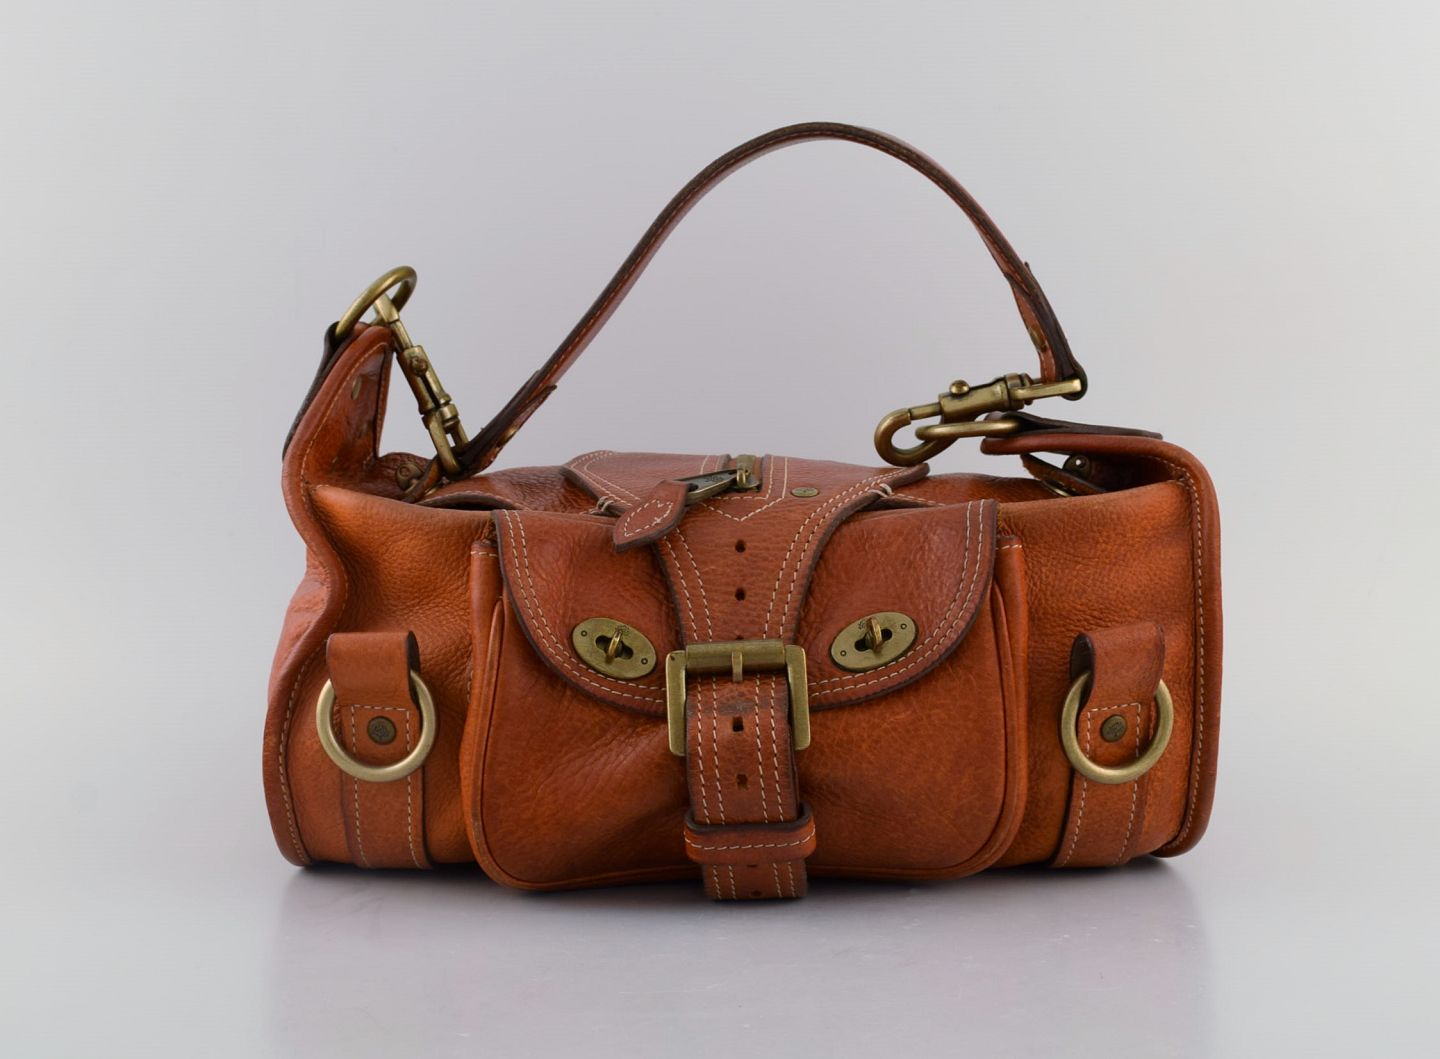  Vintage Mulberry handbag in core leather with brass  clasps and buckles. 1980s. *